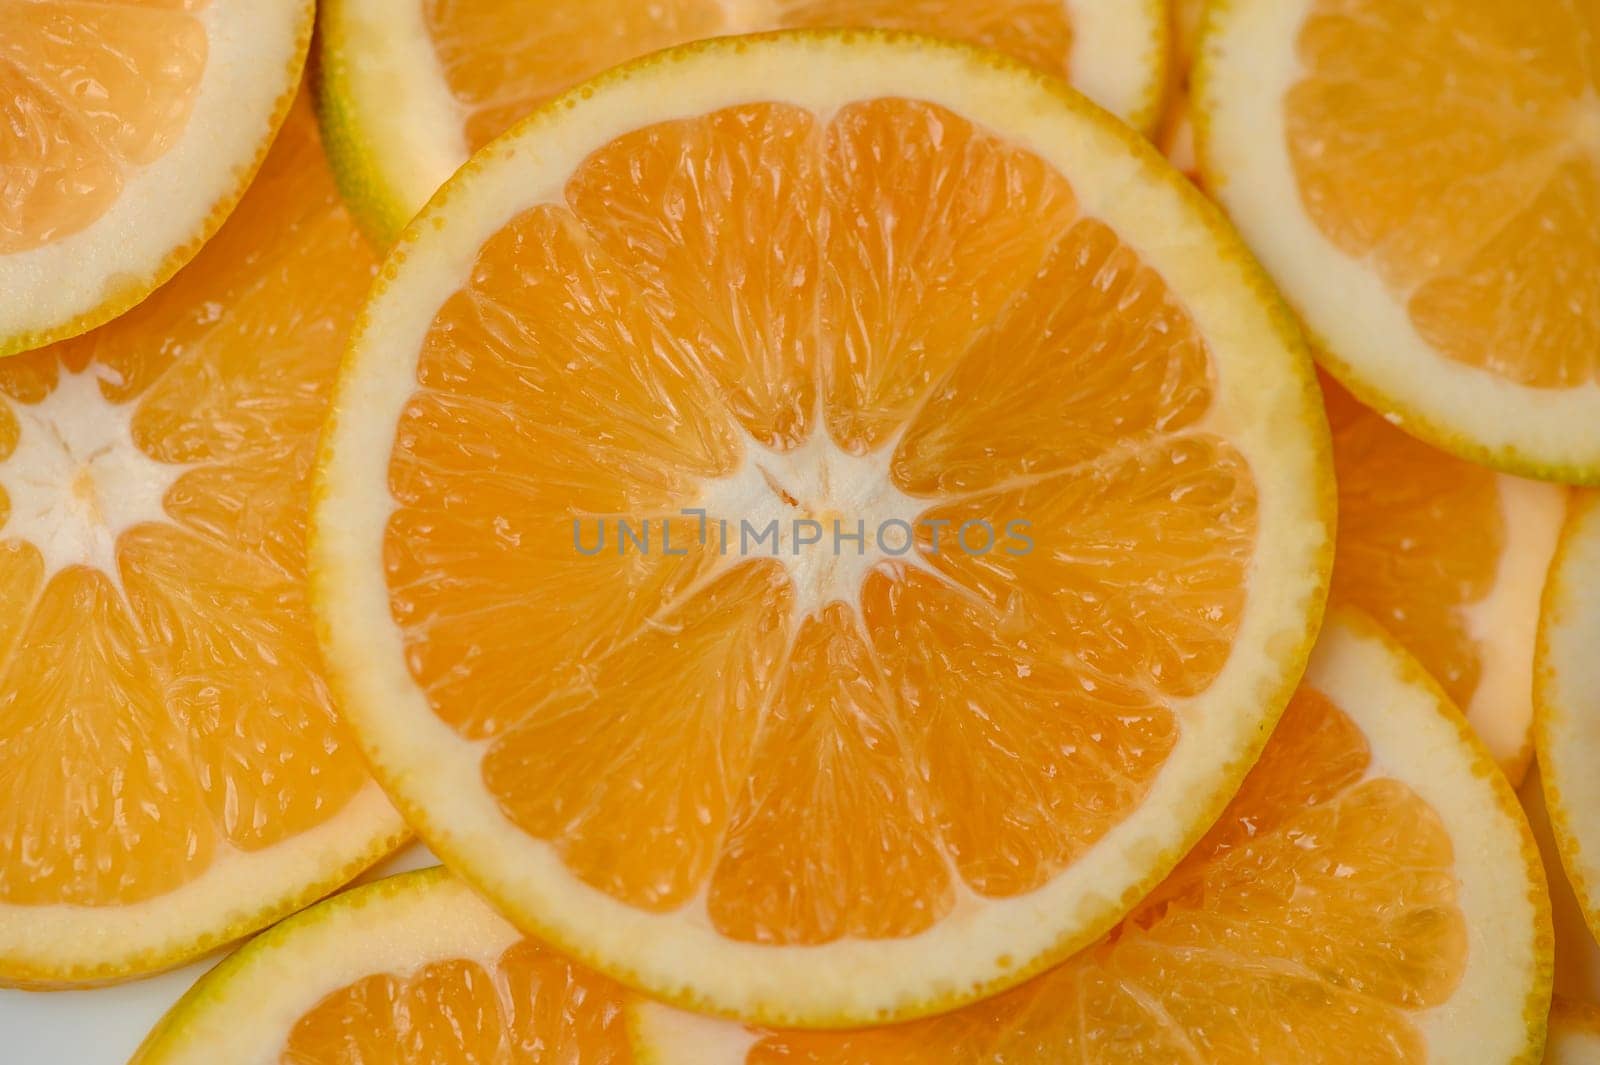 The background is orange slices. Orange is a delicious and healthy tropical fruit 2